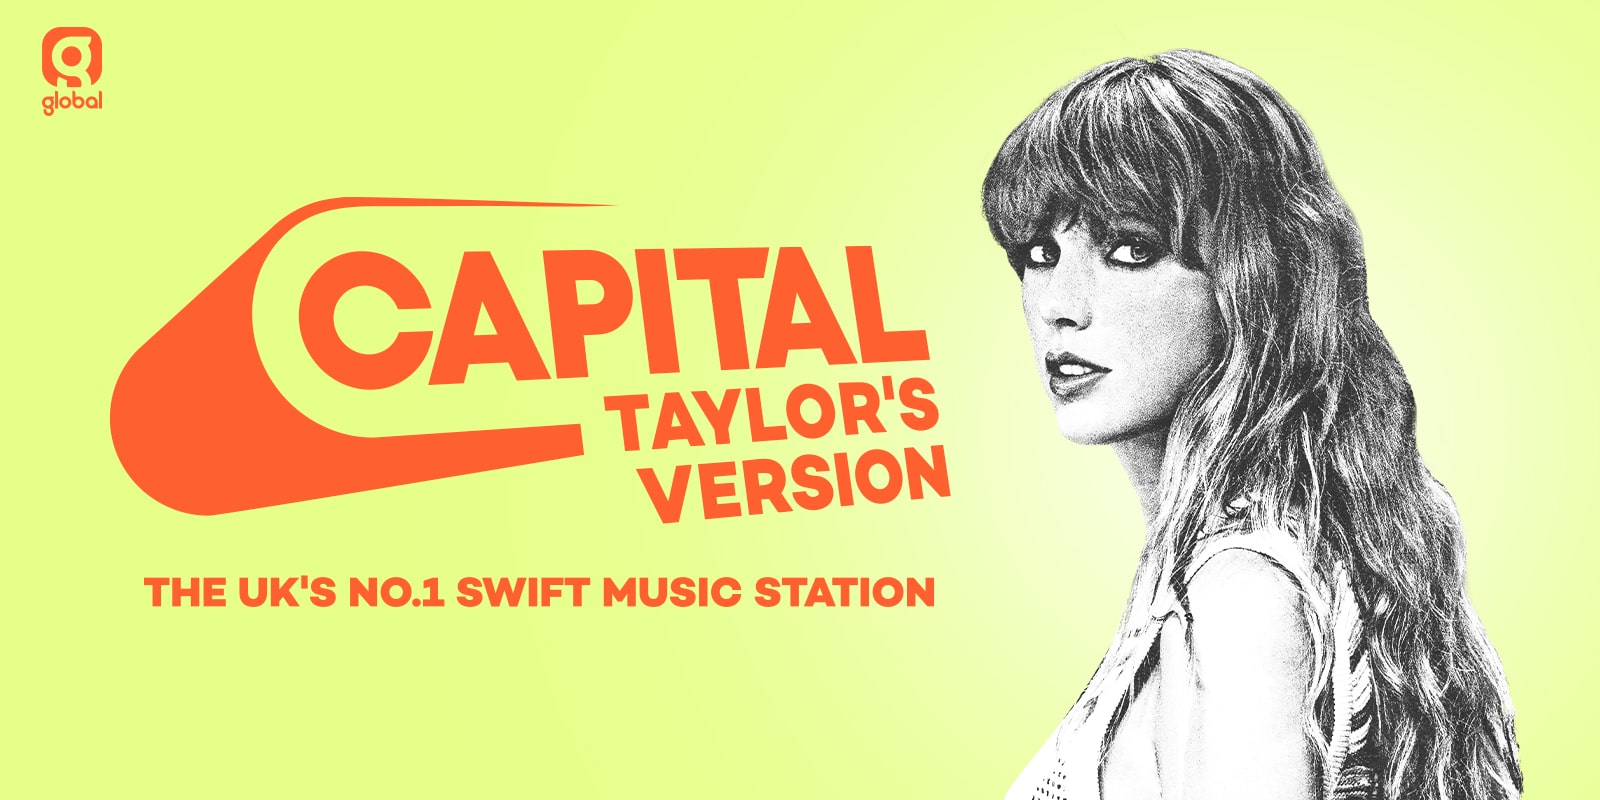 Capital launches a Taylor Swift pop-up radio station today